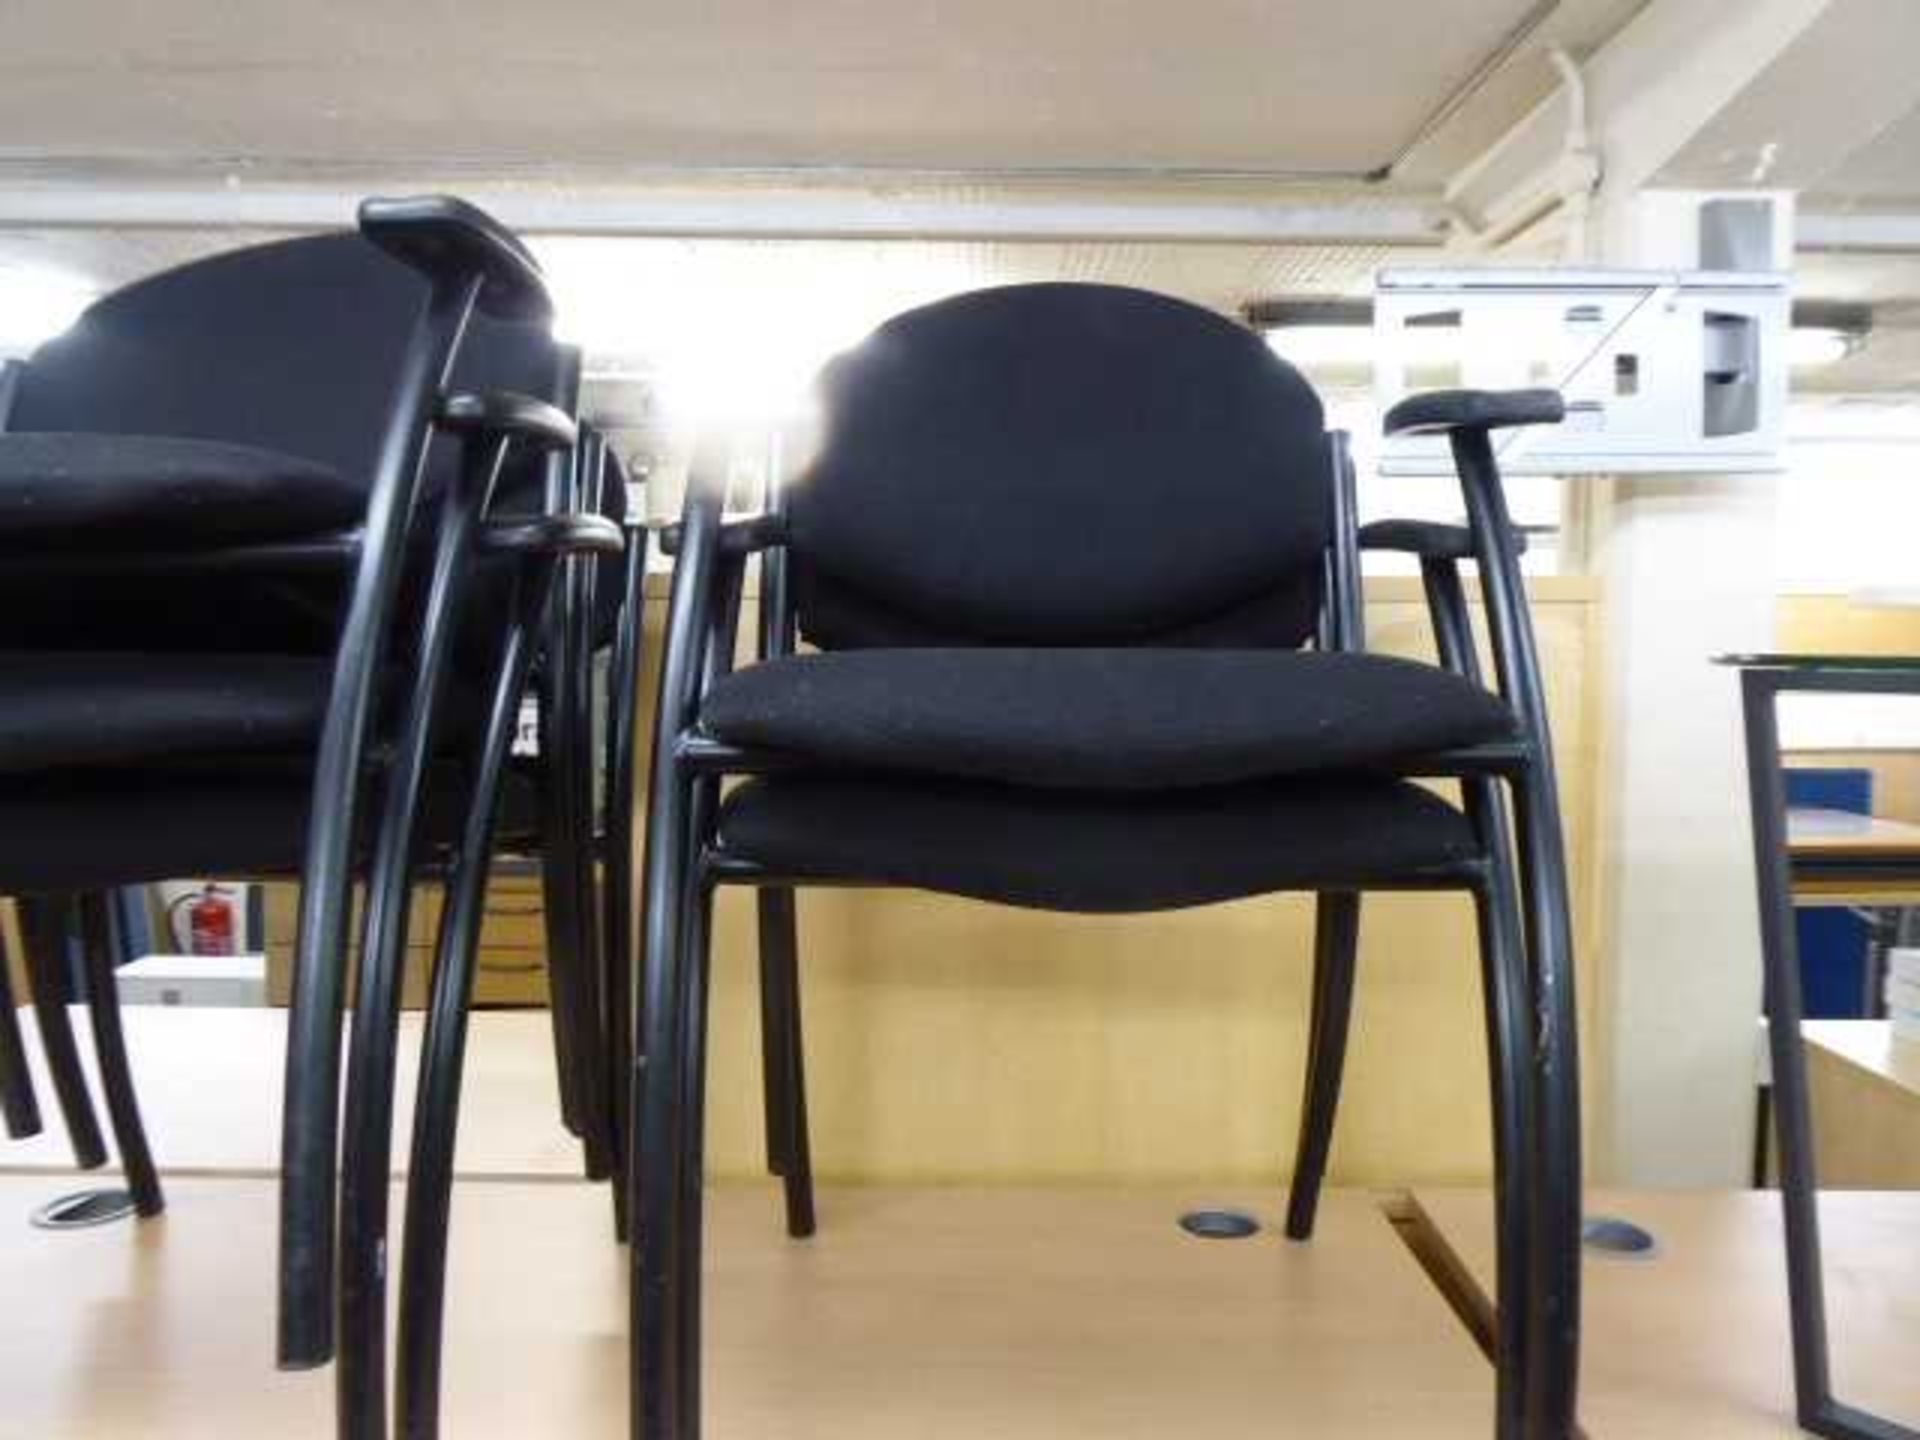 10 black cloth stacking chairs - Image 2 of 2